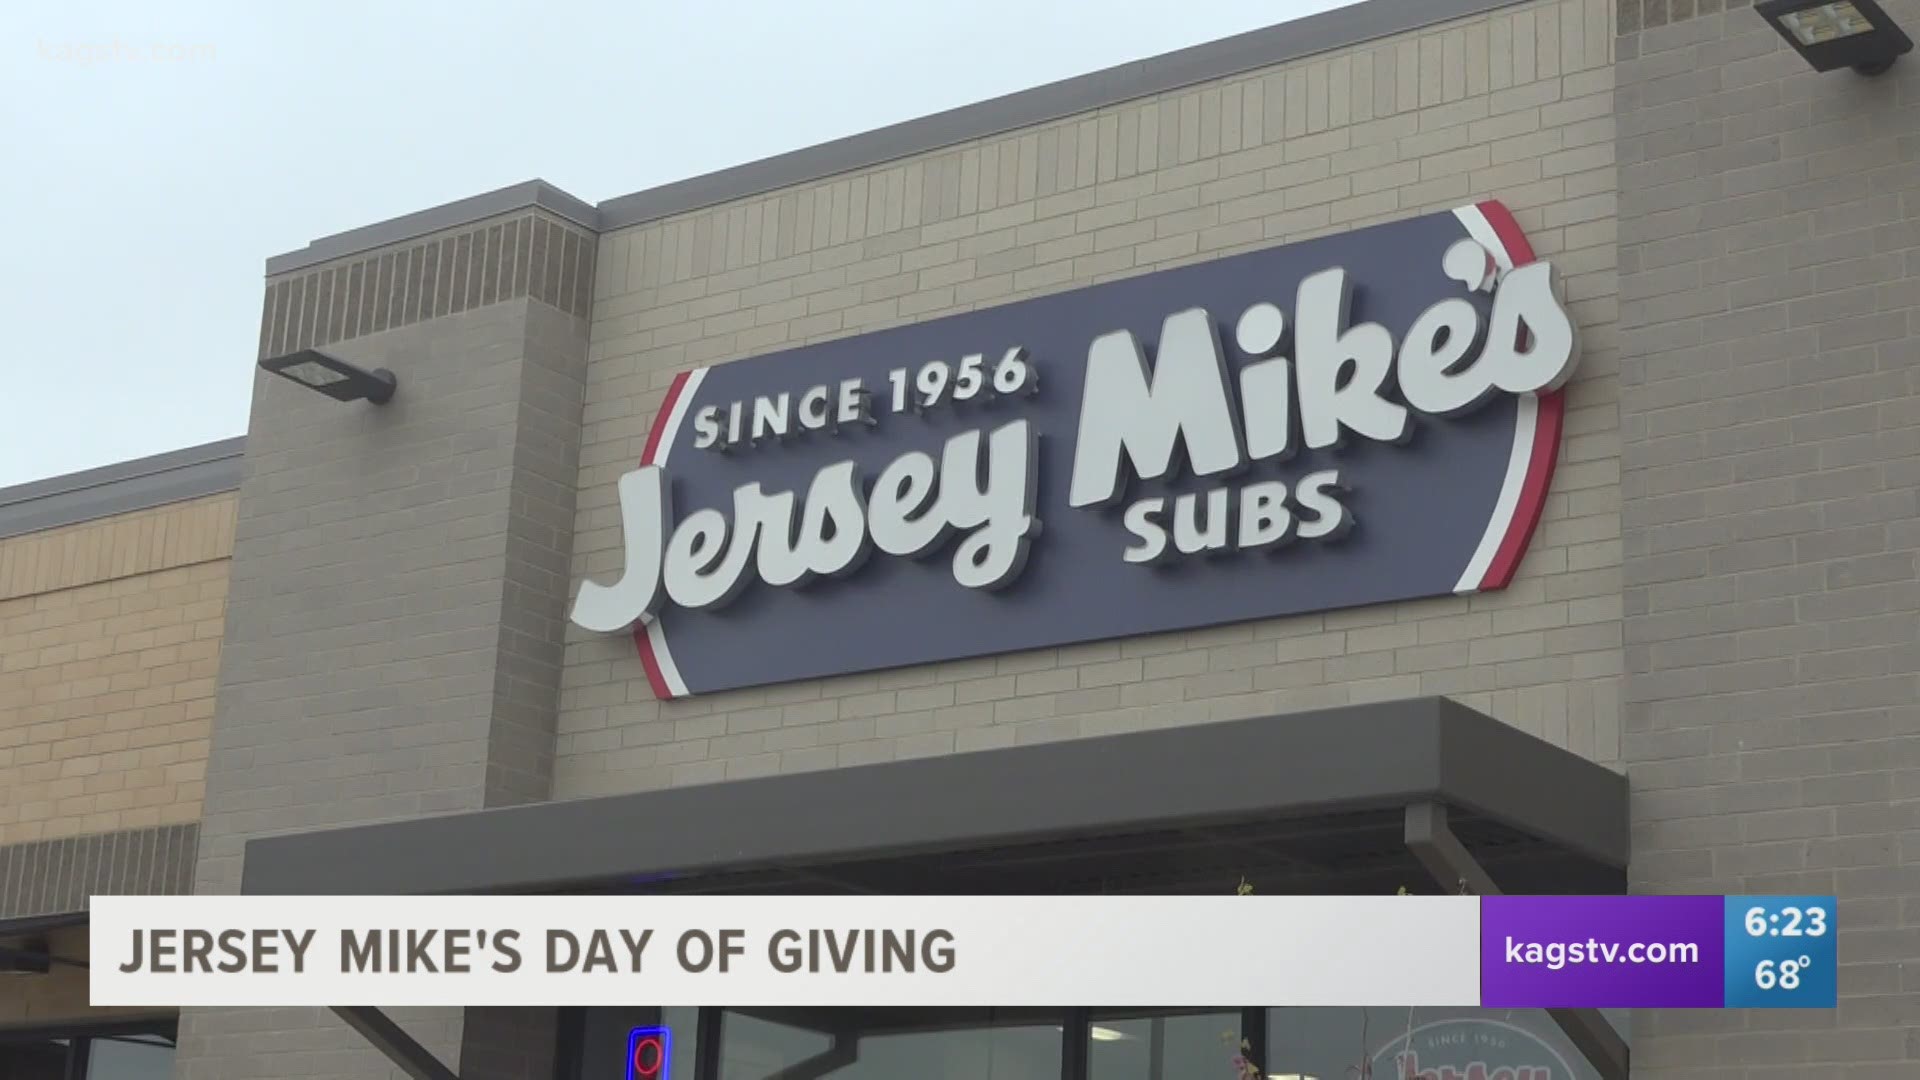 Jersey Mike's donates 100 of sales to local charity